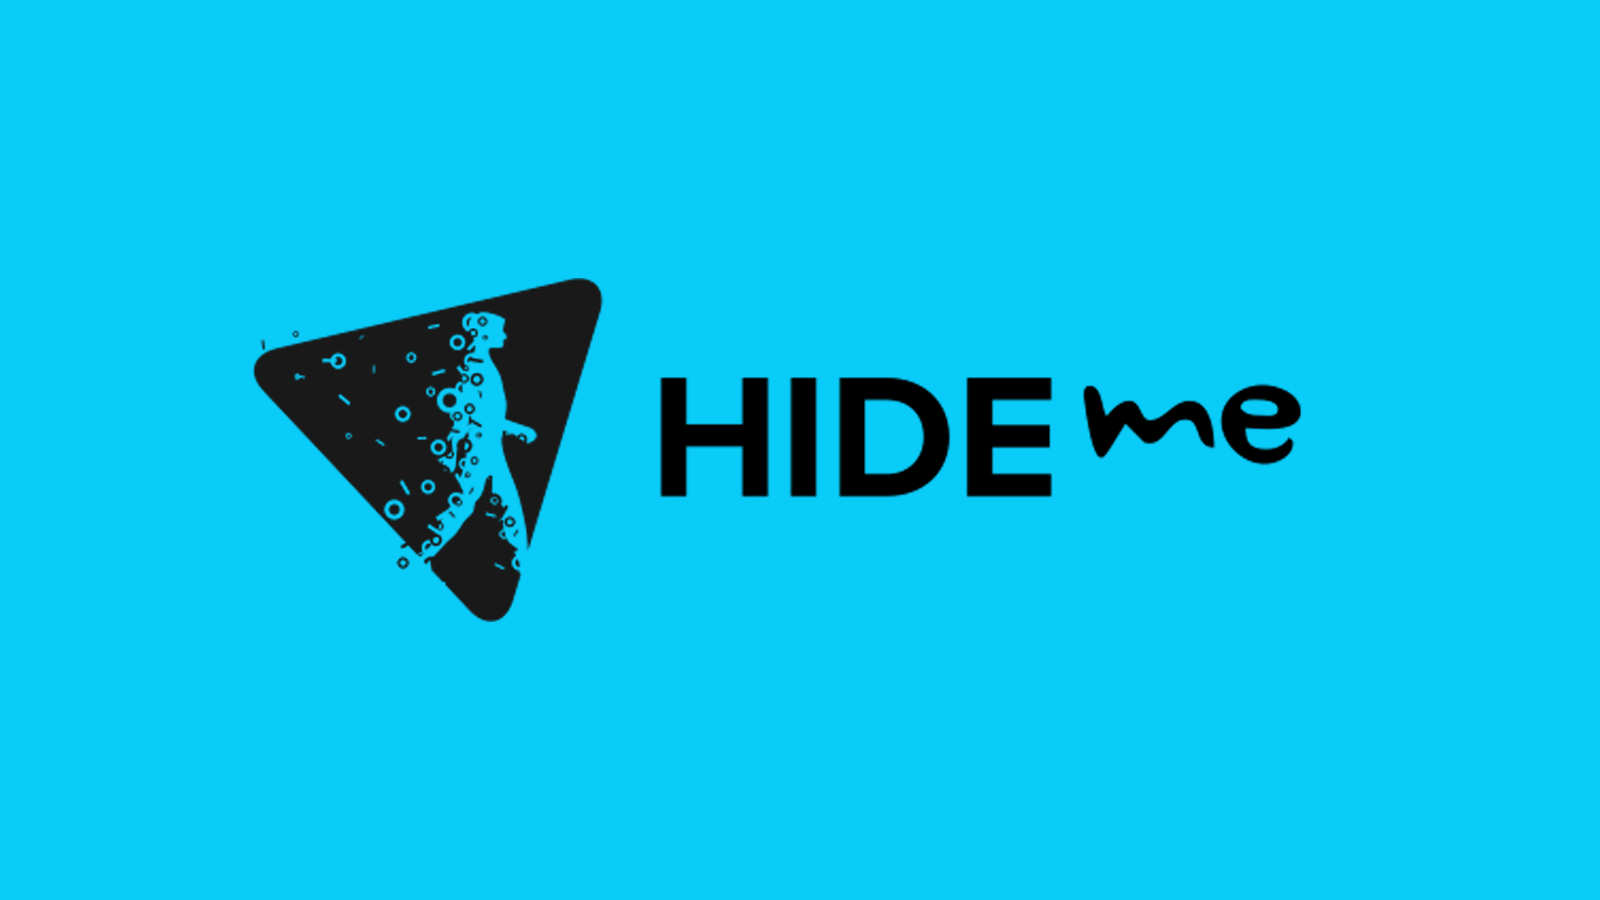 Hide.me company name and logo against blue background